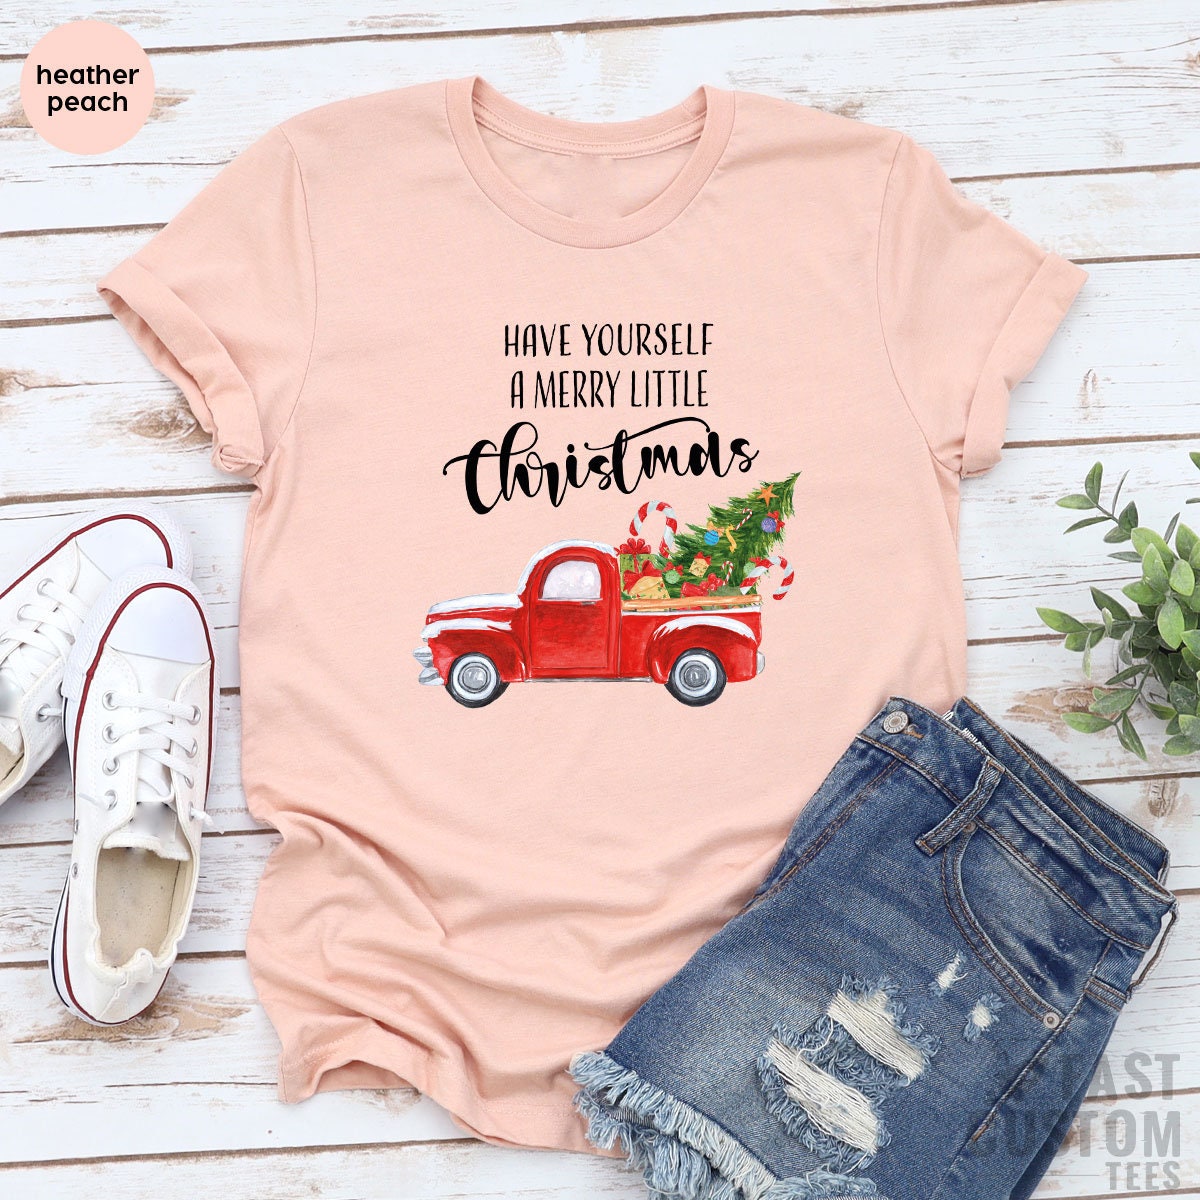 Have Yourself A Merry Little Christmas Shirt, Christmas Shirt, Christmas for Women, Christmas Gift, Holiday T-Shirt, Women's Christmas Shirt - Fastdeliverytees.com